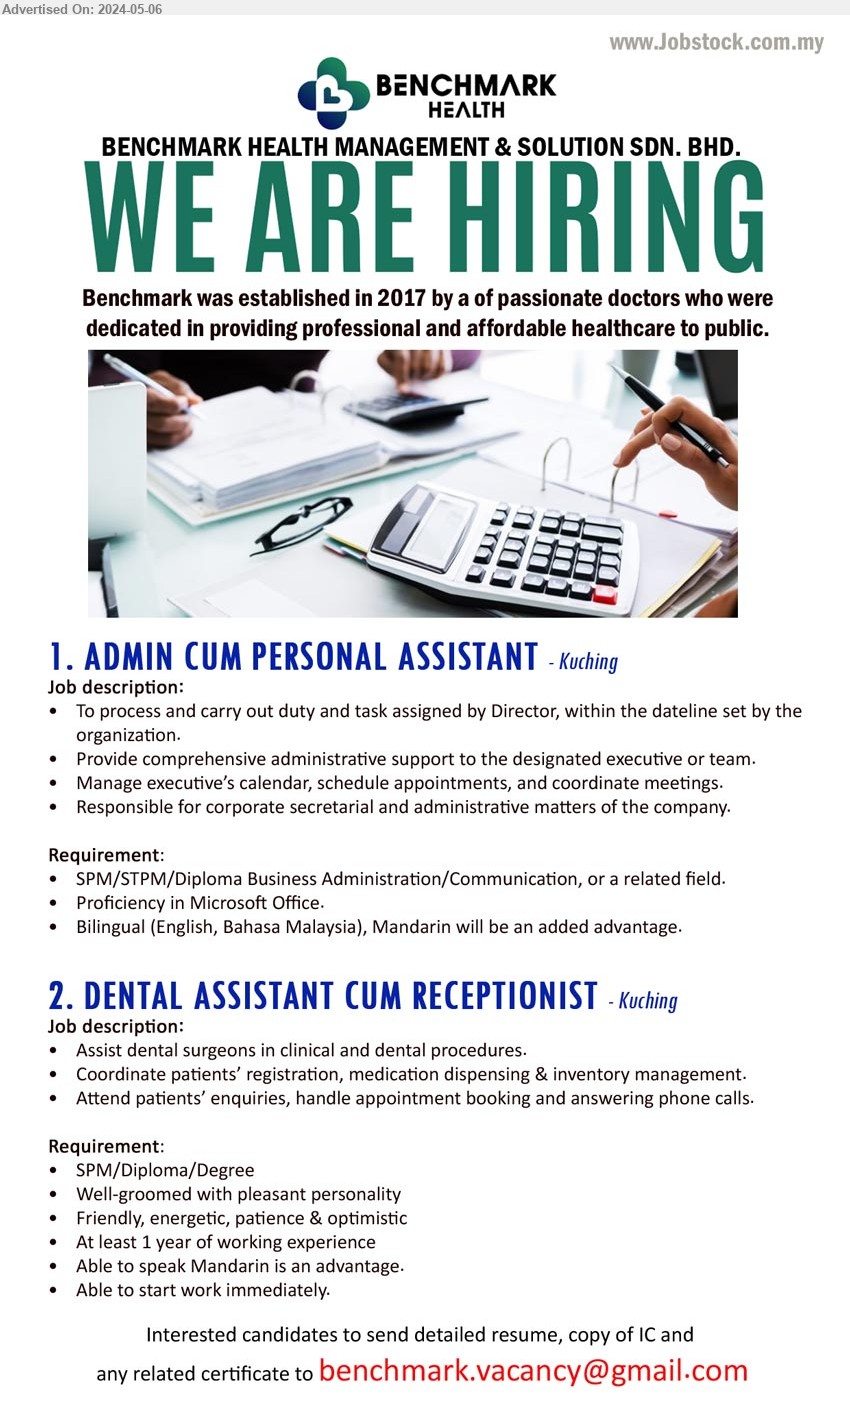 BENCHMARK HEALTH MANAGEMENT AND SOLUTION SDN BHD - 1. ADMIN CUM PERSONAL ASSISTANT (Kuching), SPM/STPM/Diploma Business Administration/Communication,...
2. DENTAL ASSISTANT CUM RECEPTIONIST (Kuching), SPM/Diploma/Degree, 1 yr. exp., Able to speak Mandarin is an advantage.,...
Email resume to ...